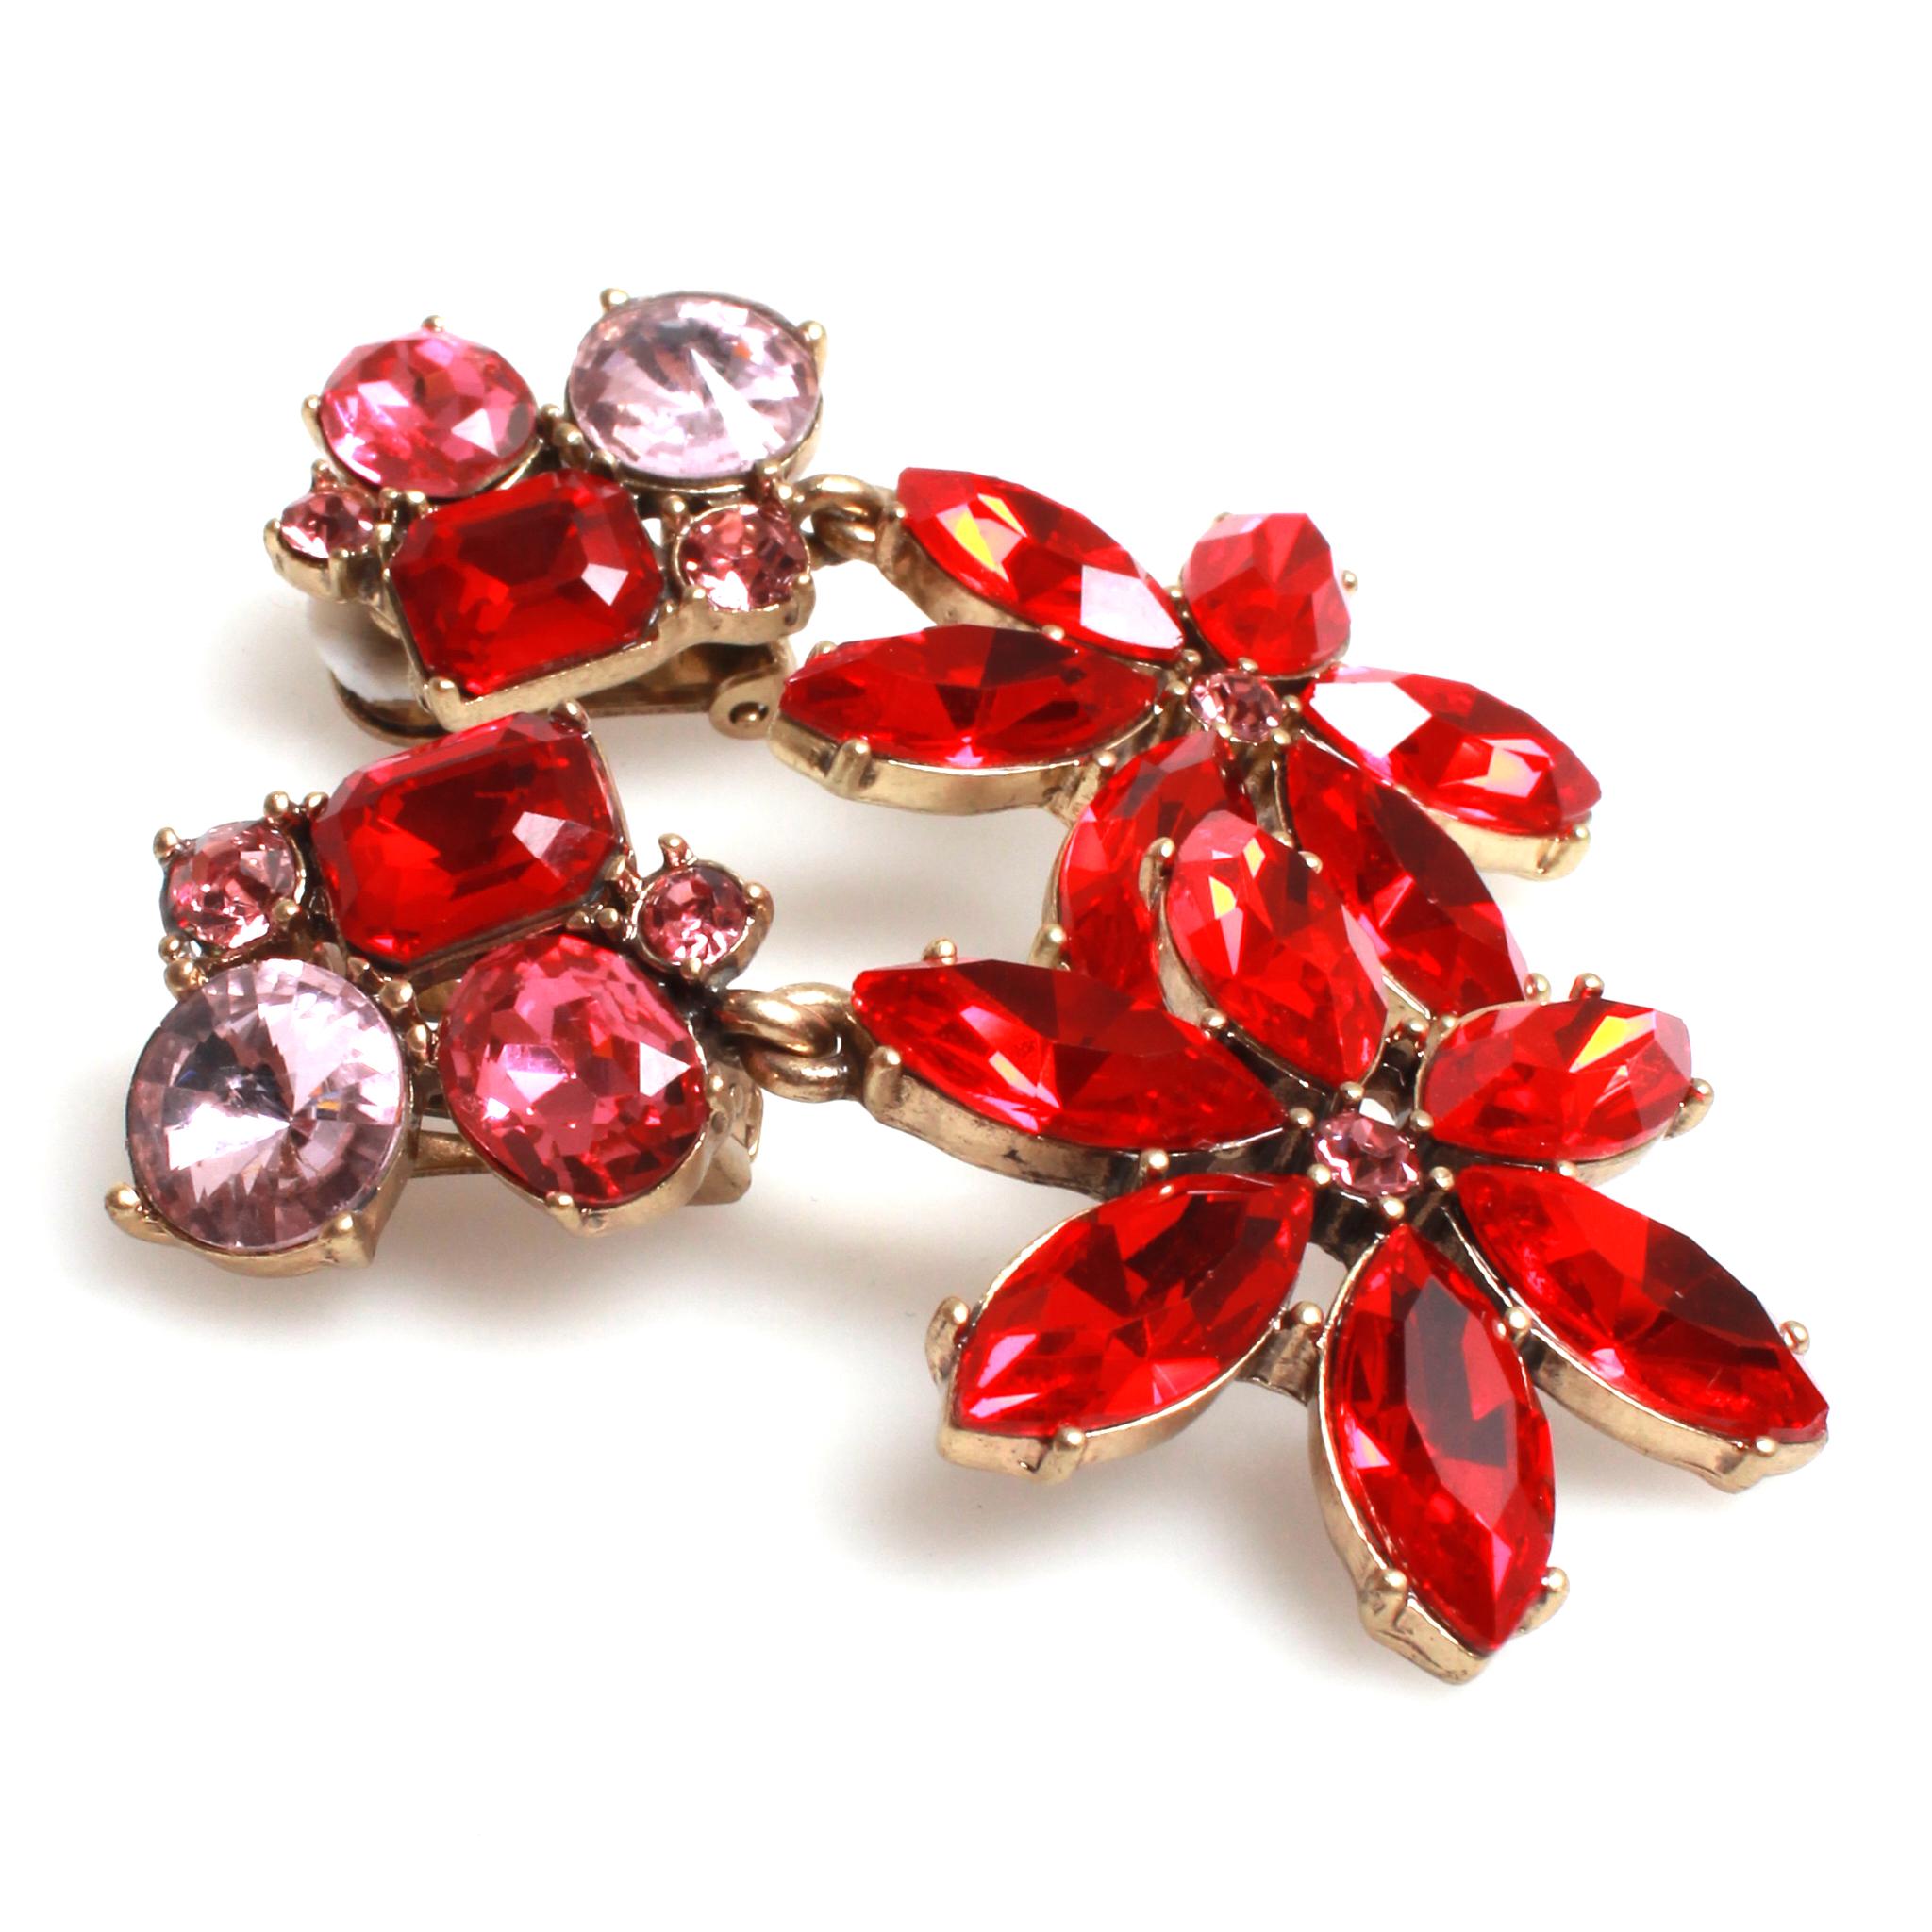 Pink and red Oscar de la Renta clip on earrings with dangling flower drop. Clip on backs. Made in USA.
